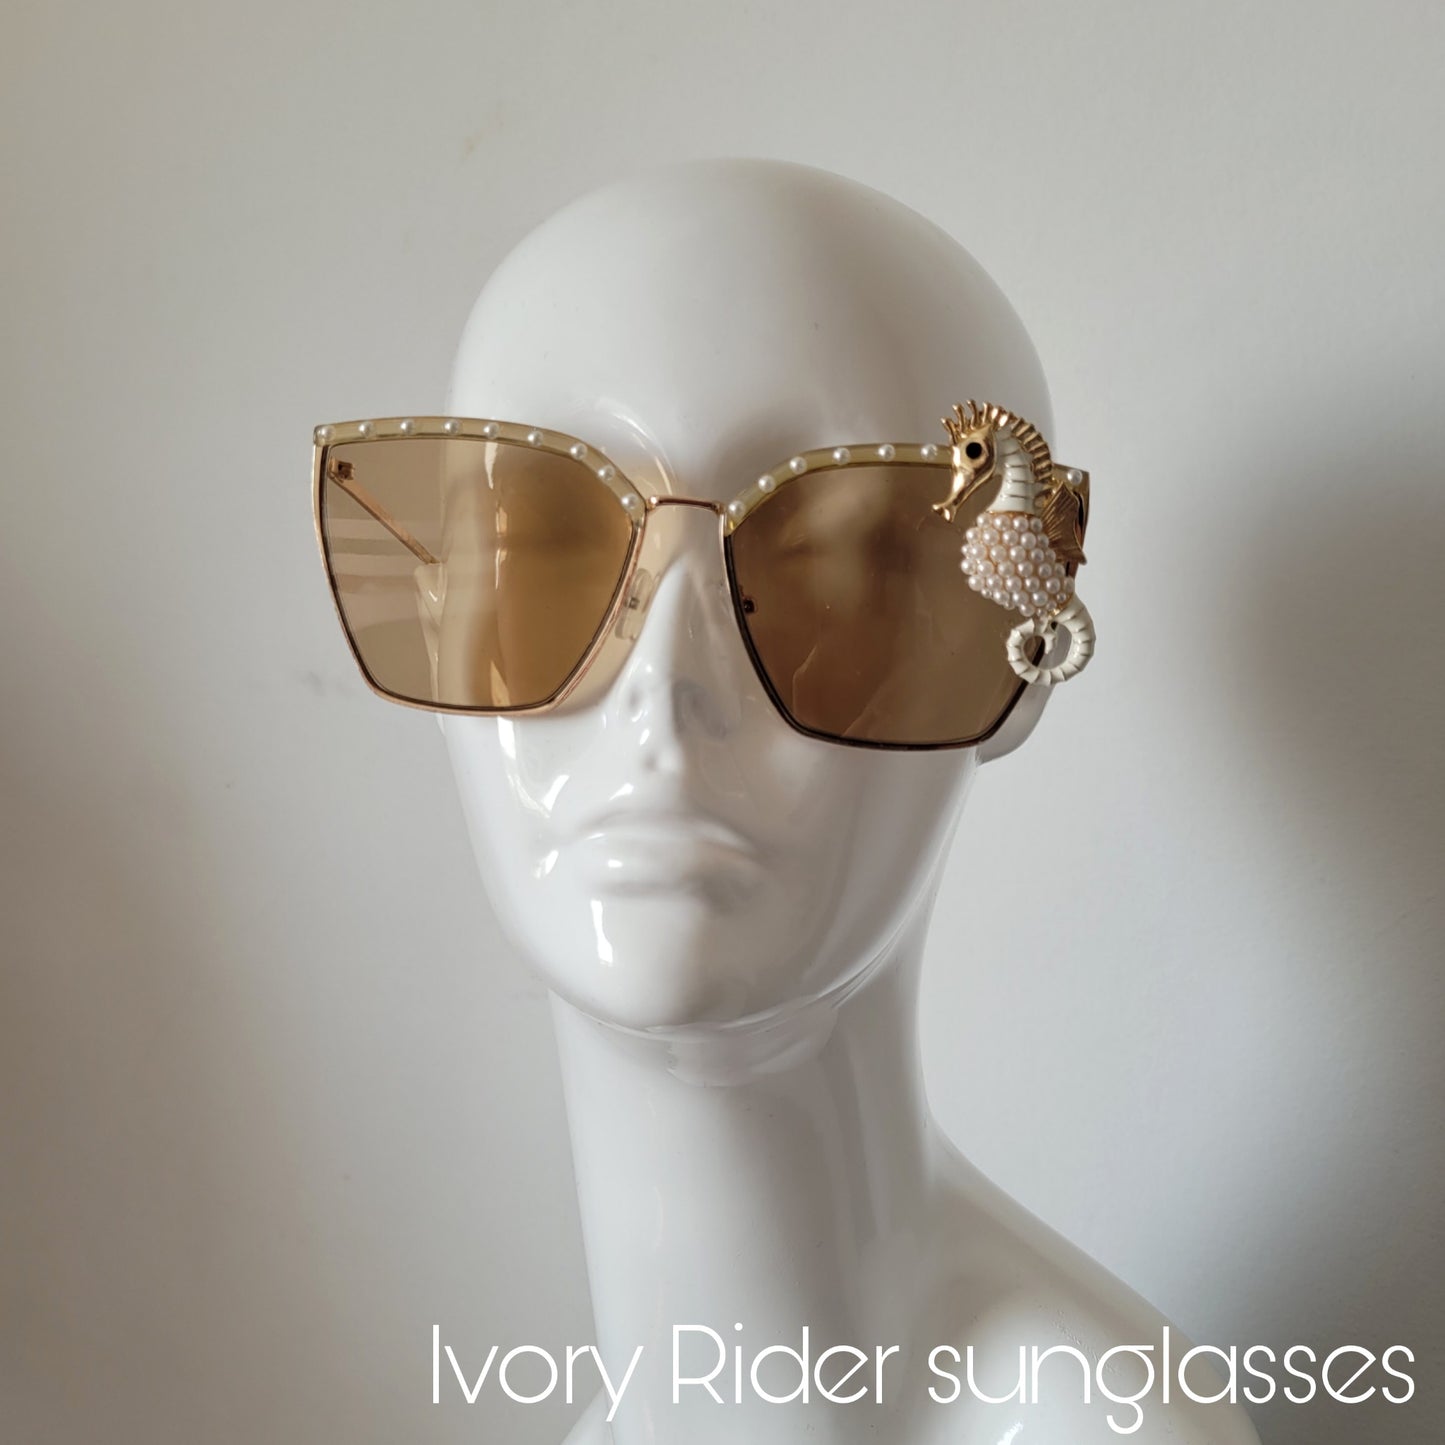 Shifting Depths collection: the Ivory Rider sunglasses